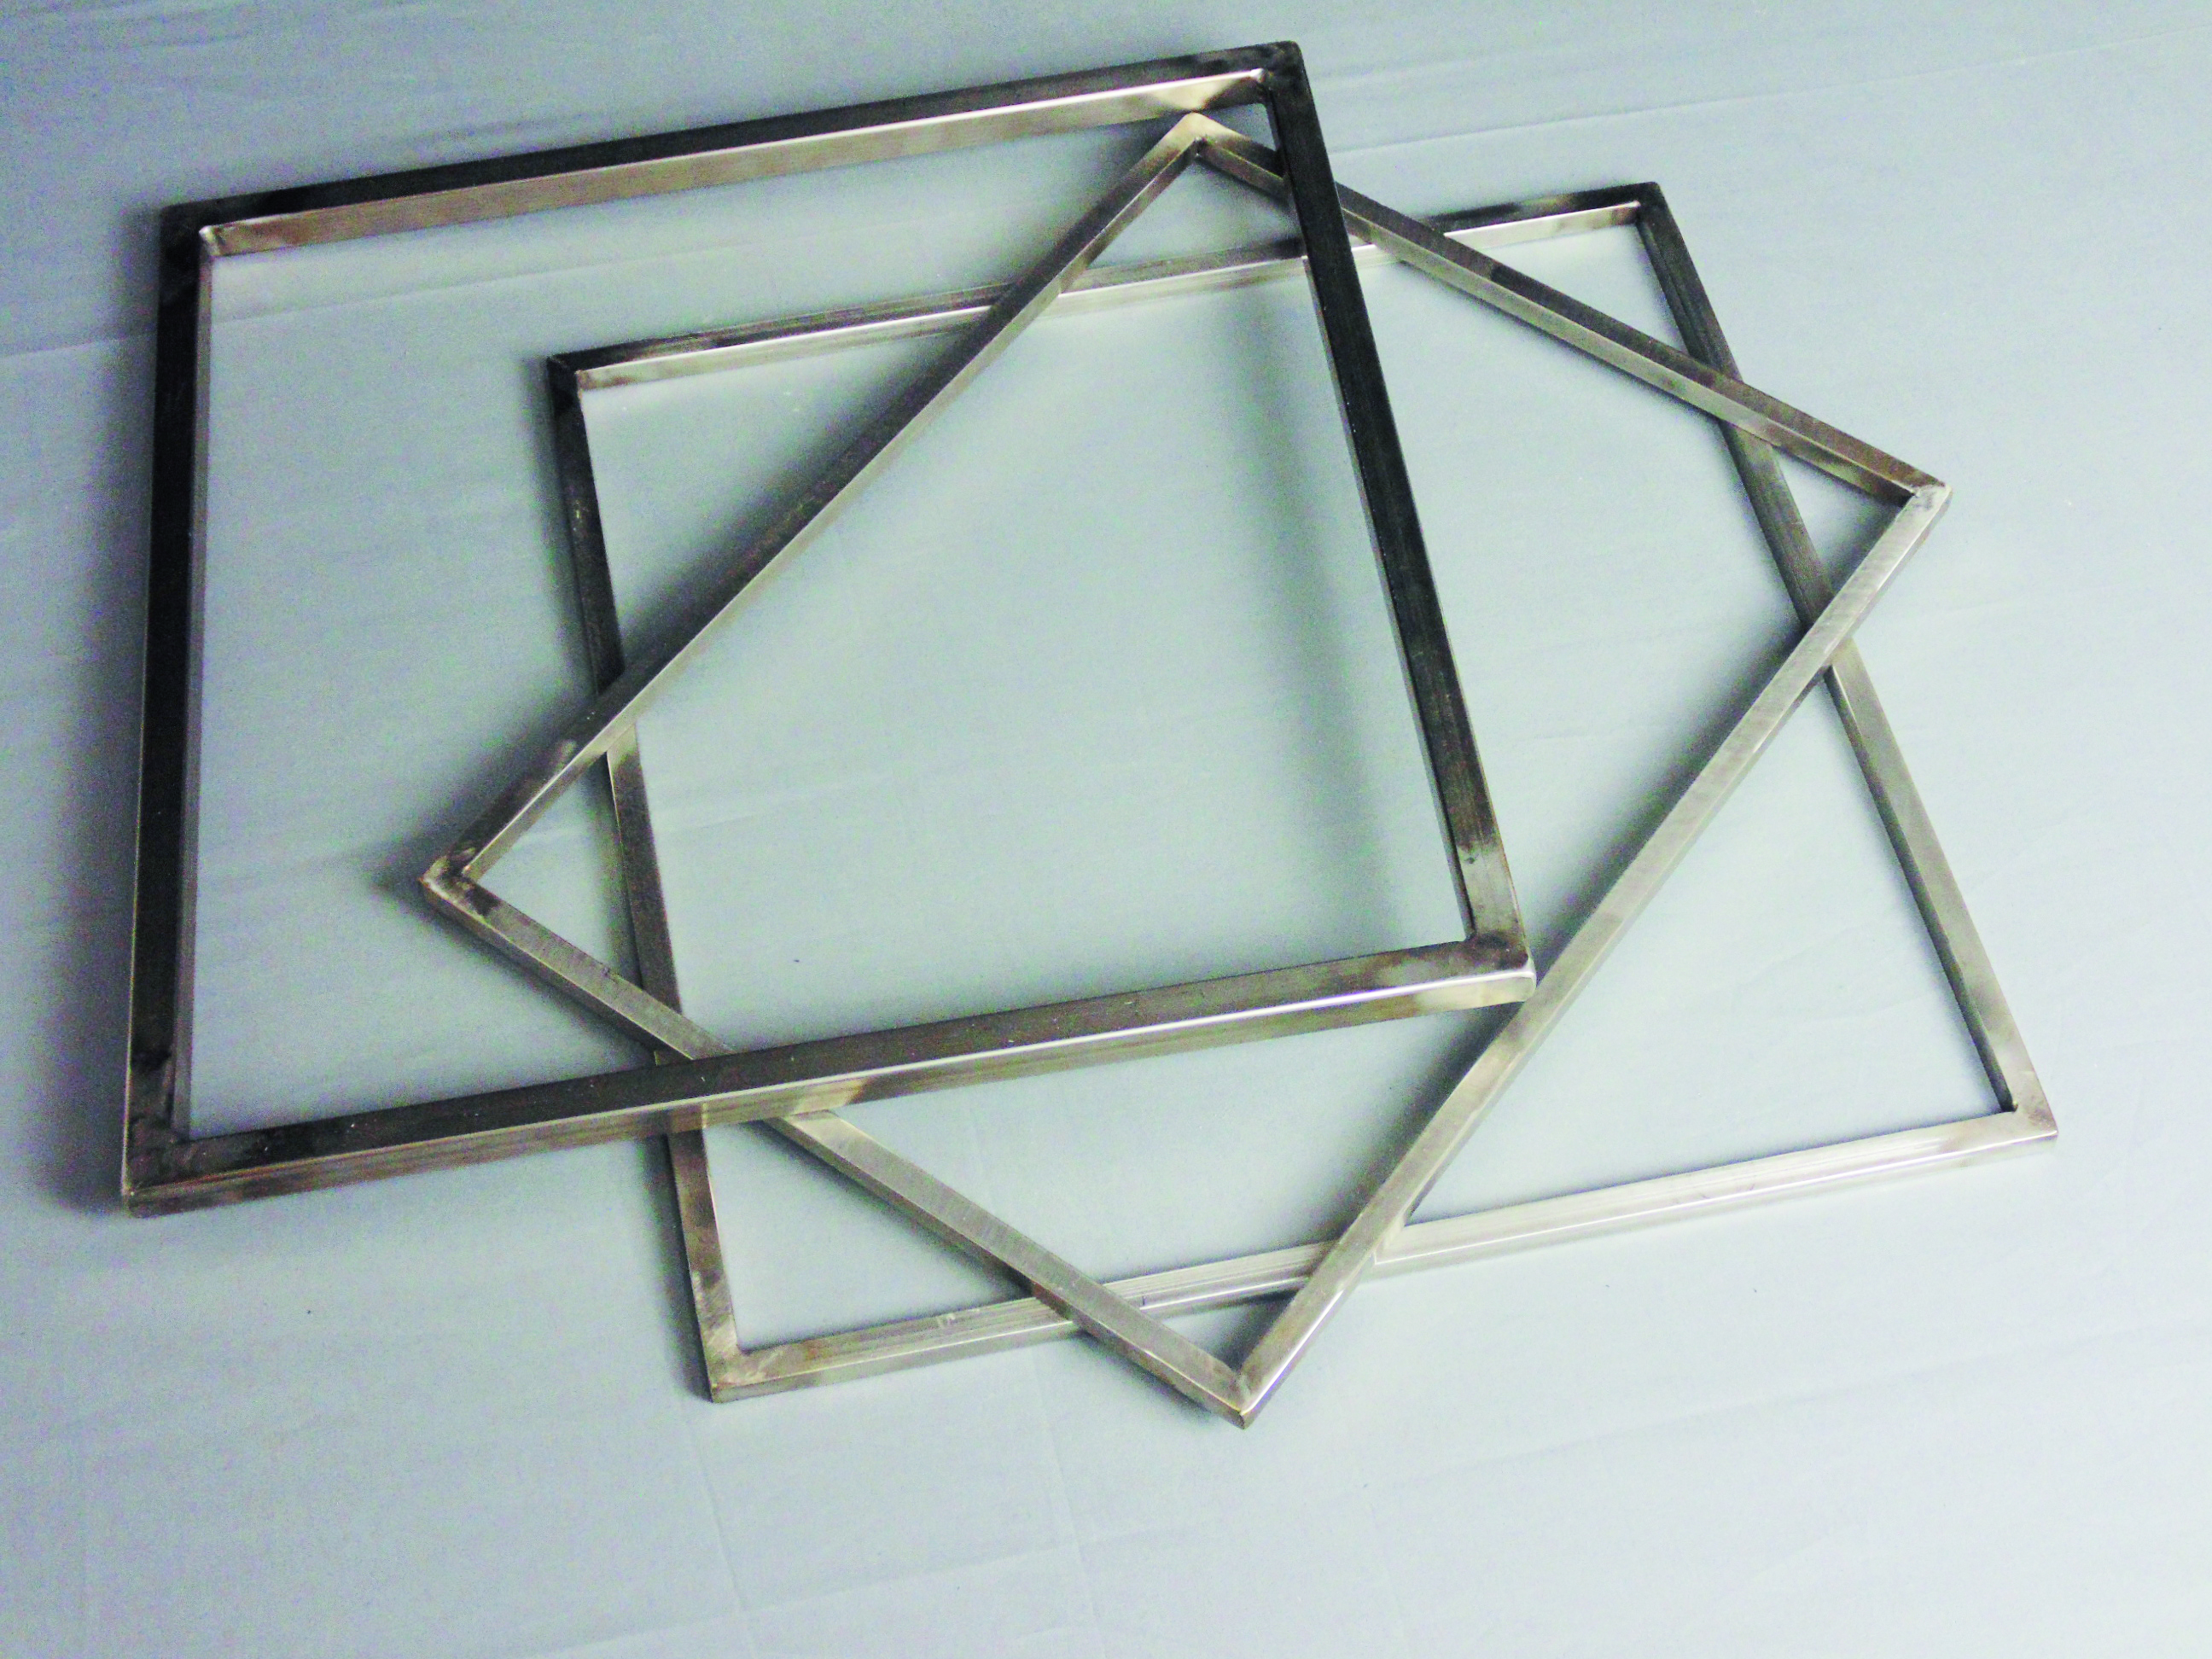 Stainless steel confectionery frame